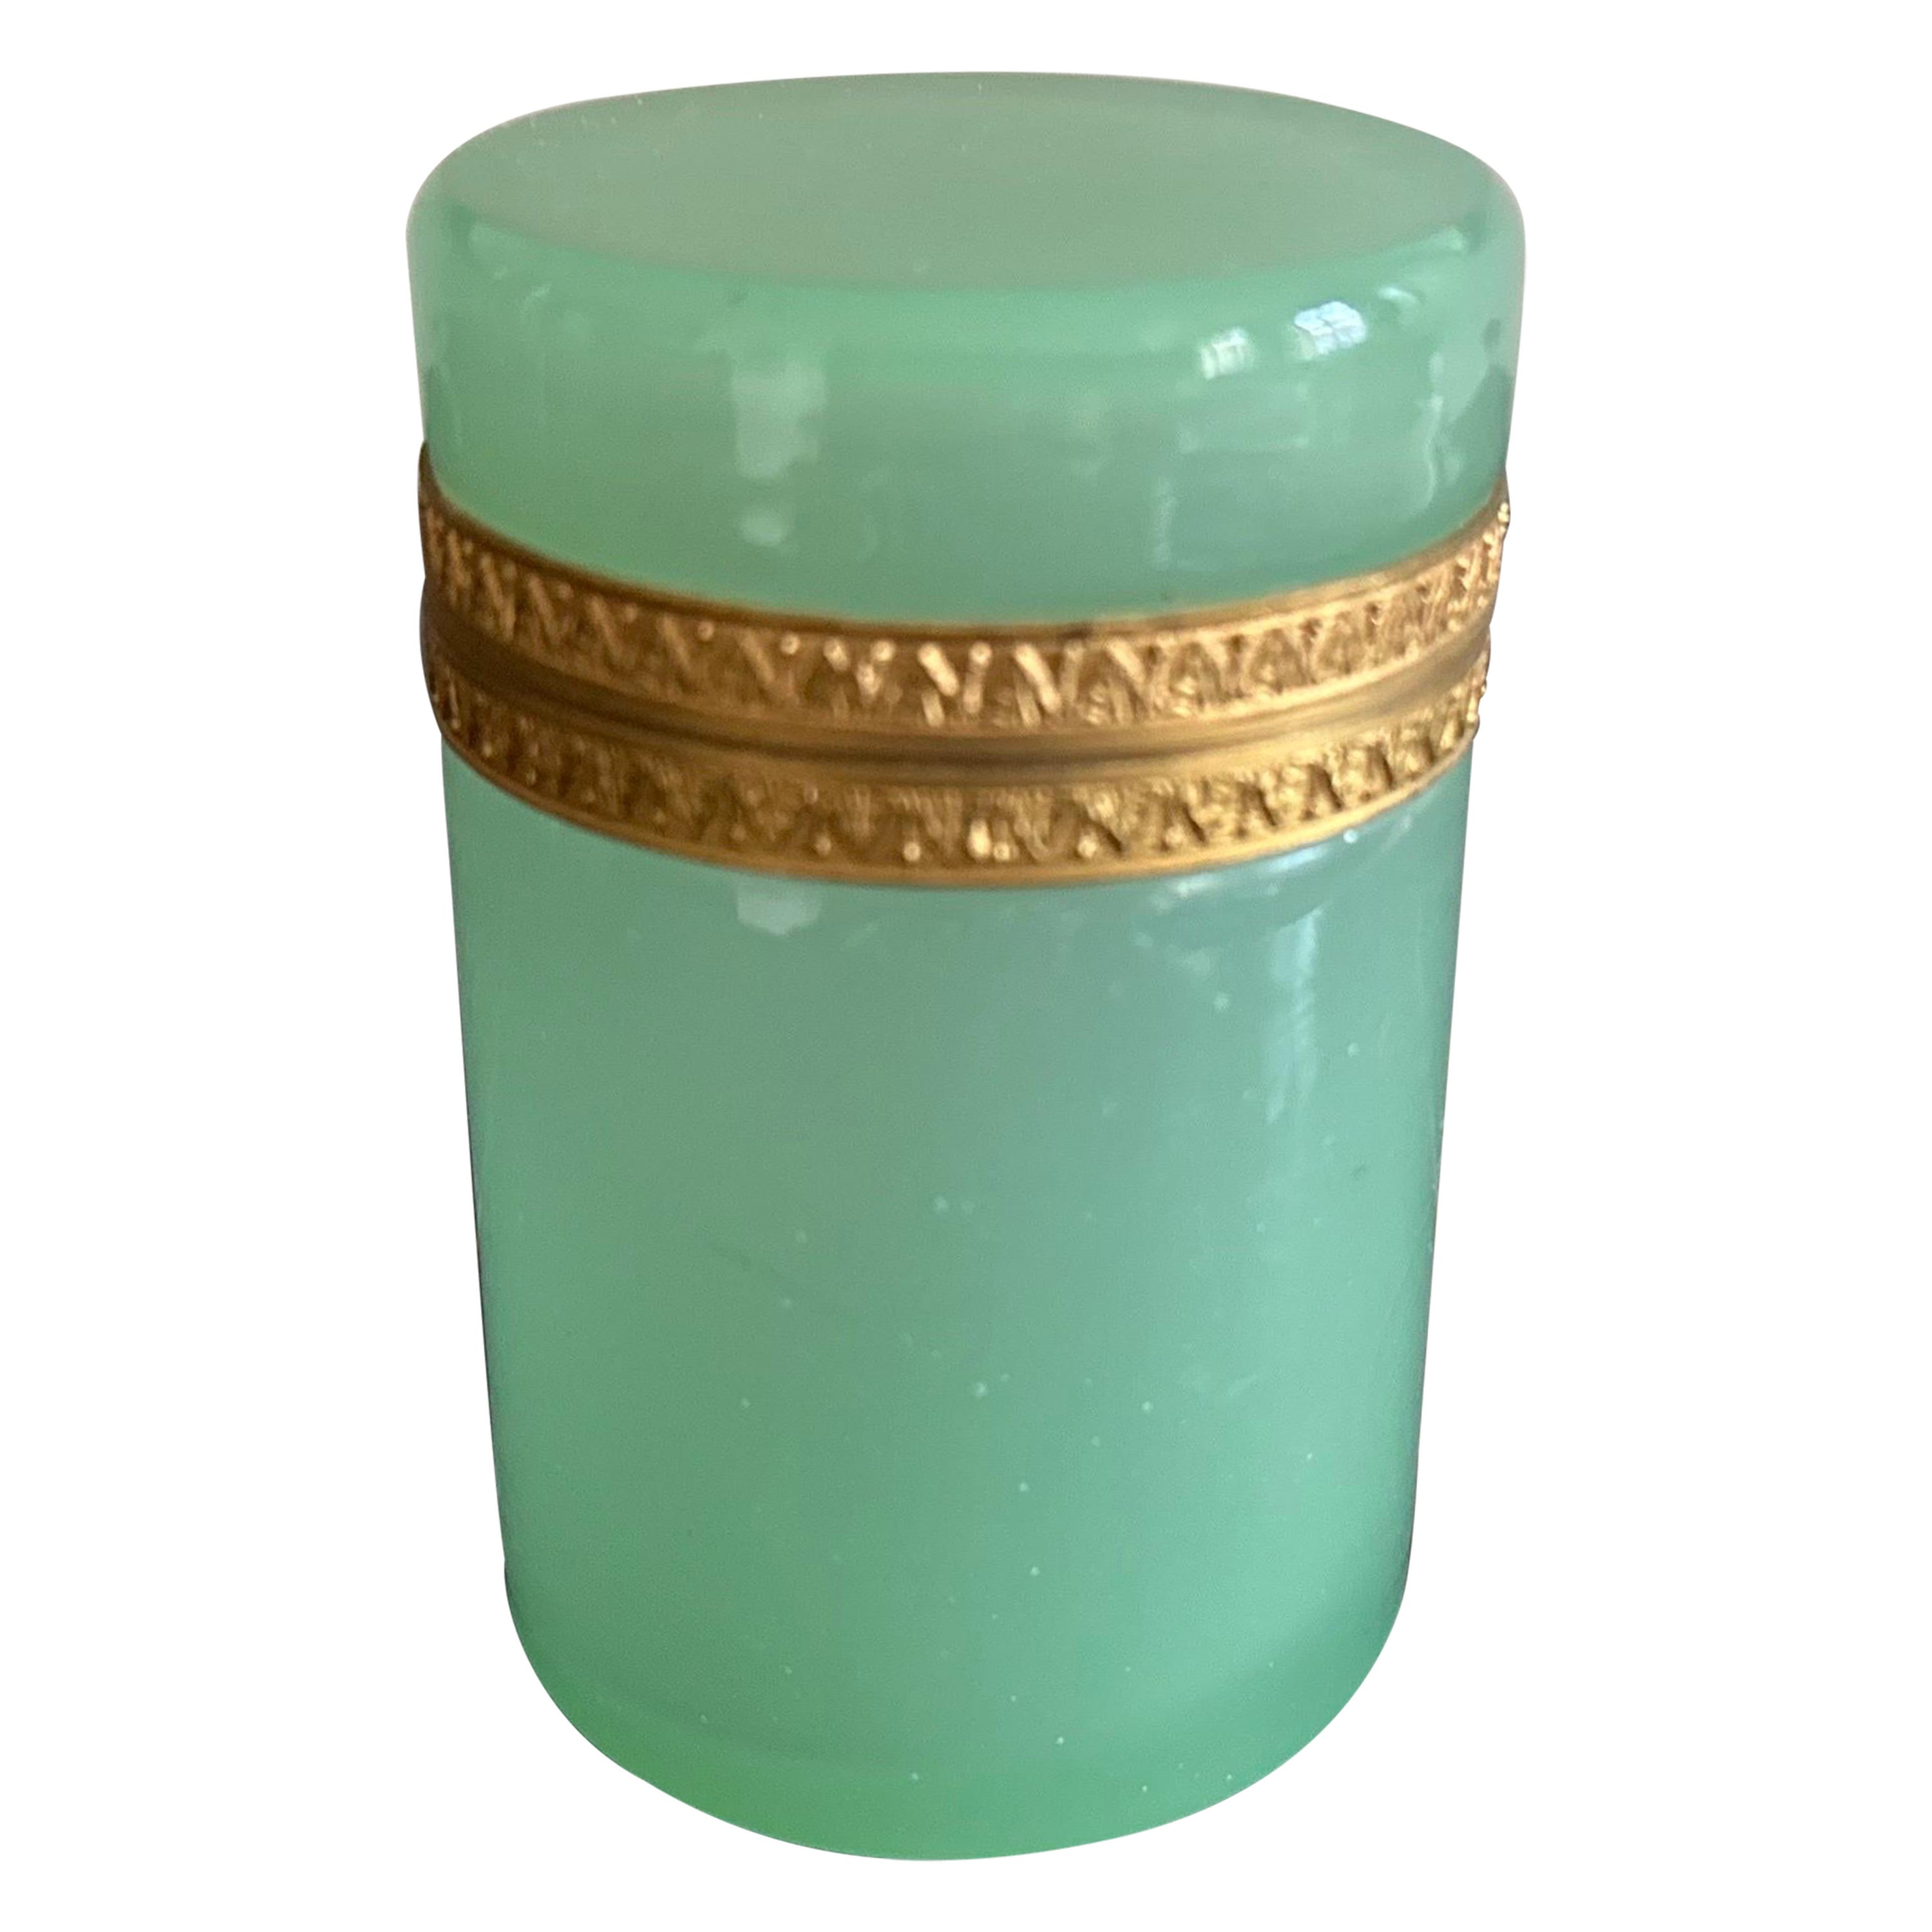  CENEDESE Glass Murano Jewelry Box - Jade Green, Early 20th Century Italy For Sale